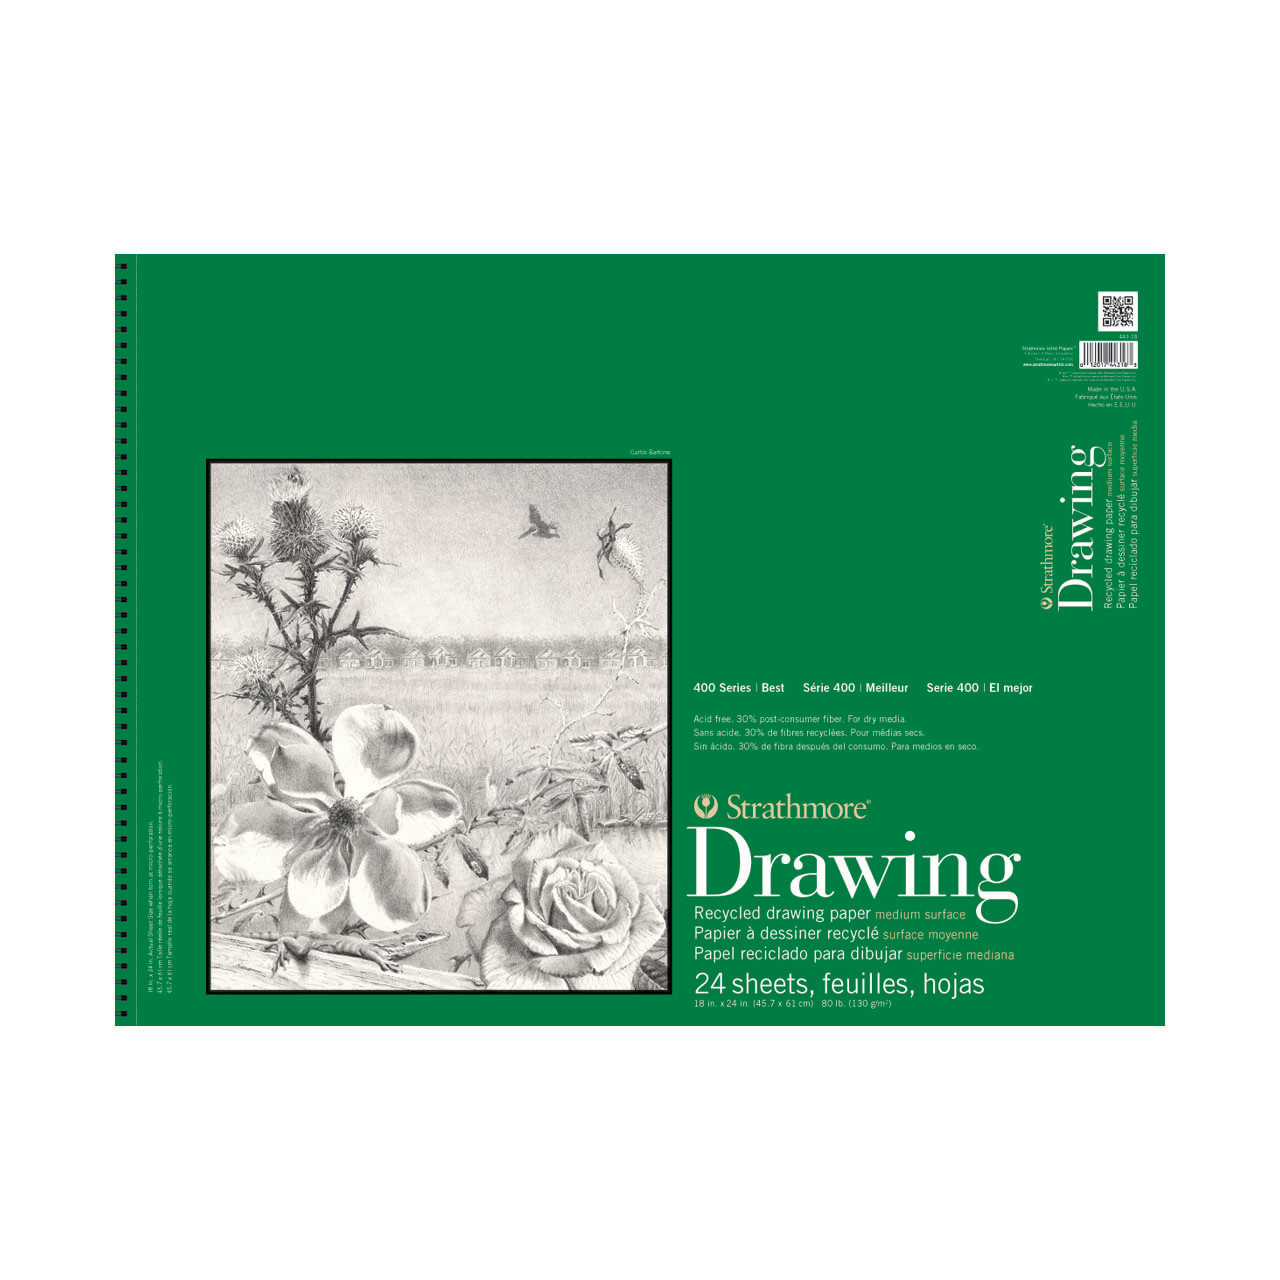 Drawing Board 17 x 24 – SRecomsolutions